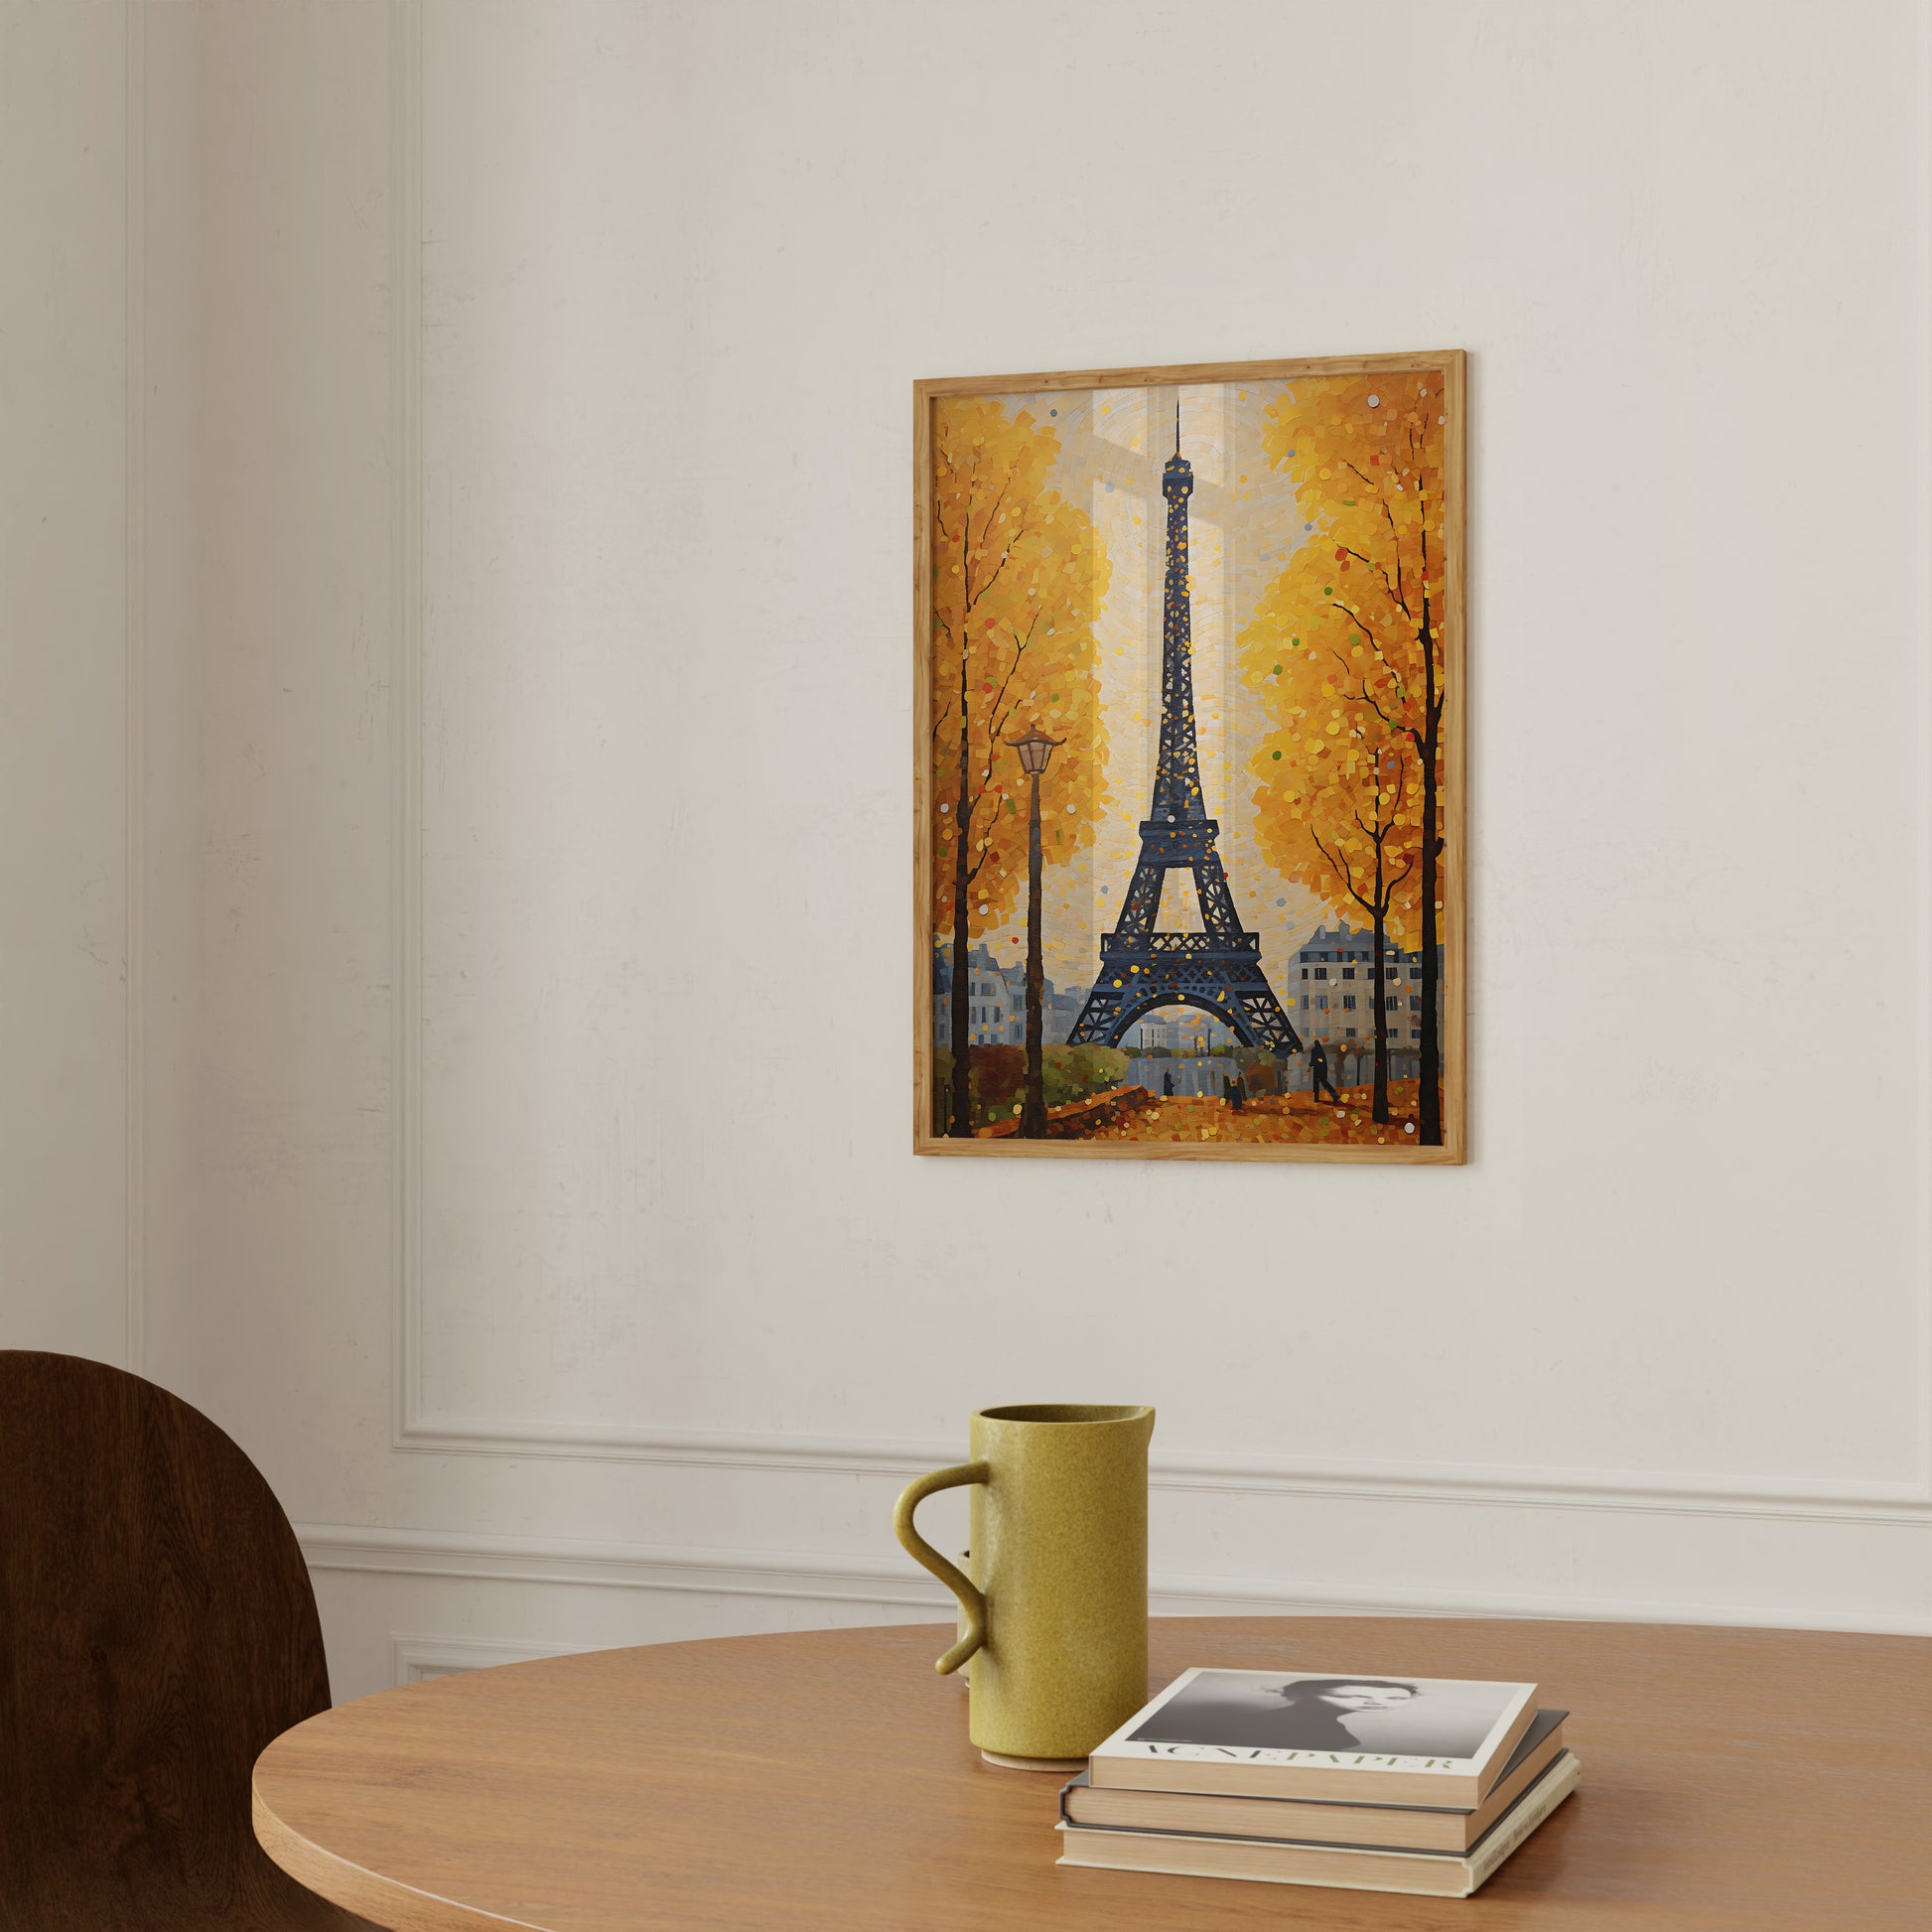 A painting of the Eiffel Tower amidst autumn trees, displayed above a table with a mug and books.